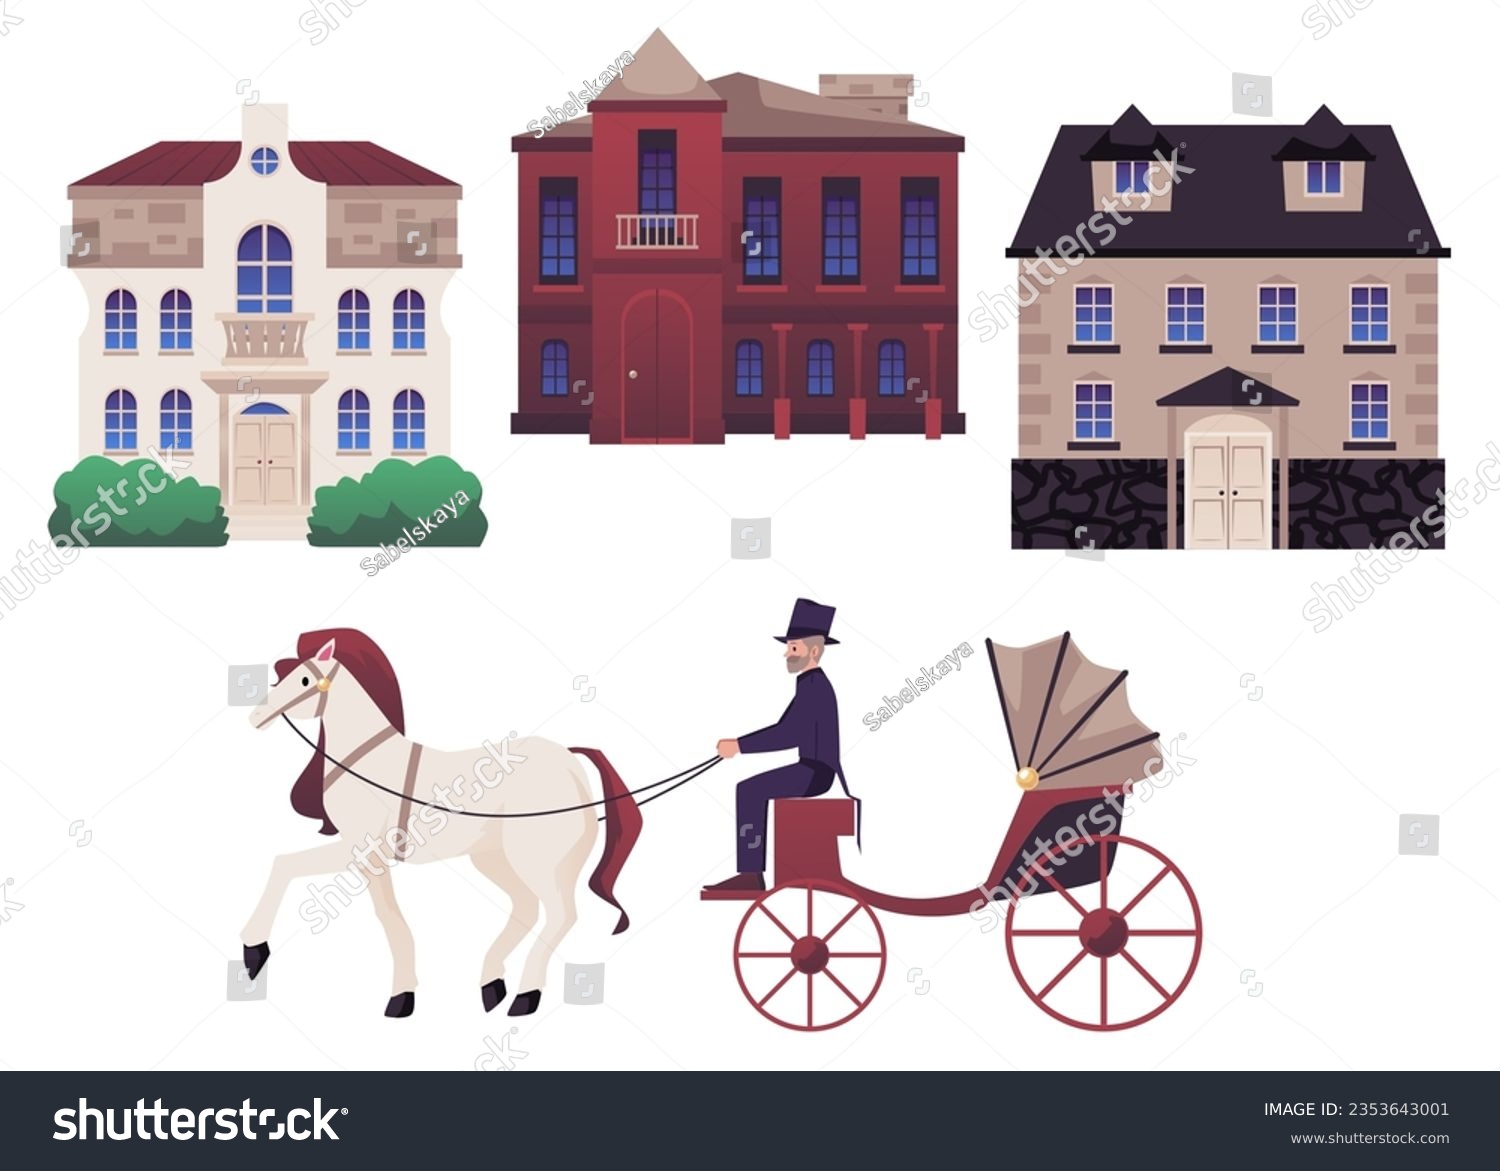 SVG of Elements of Victorian city vector illustrations set. Buildings and castles, transport, carriage with white horse isolated on white background. Historical architecture concept of 19th, 18th century svg